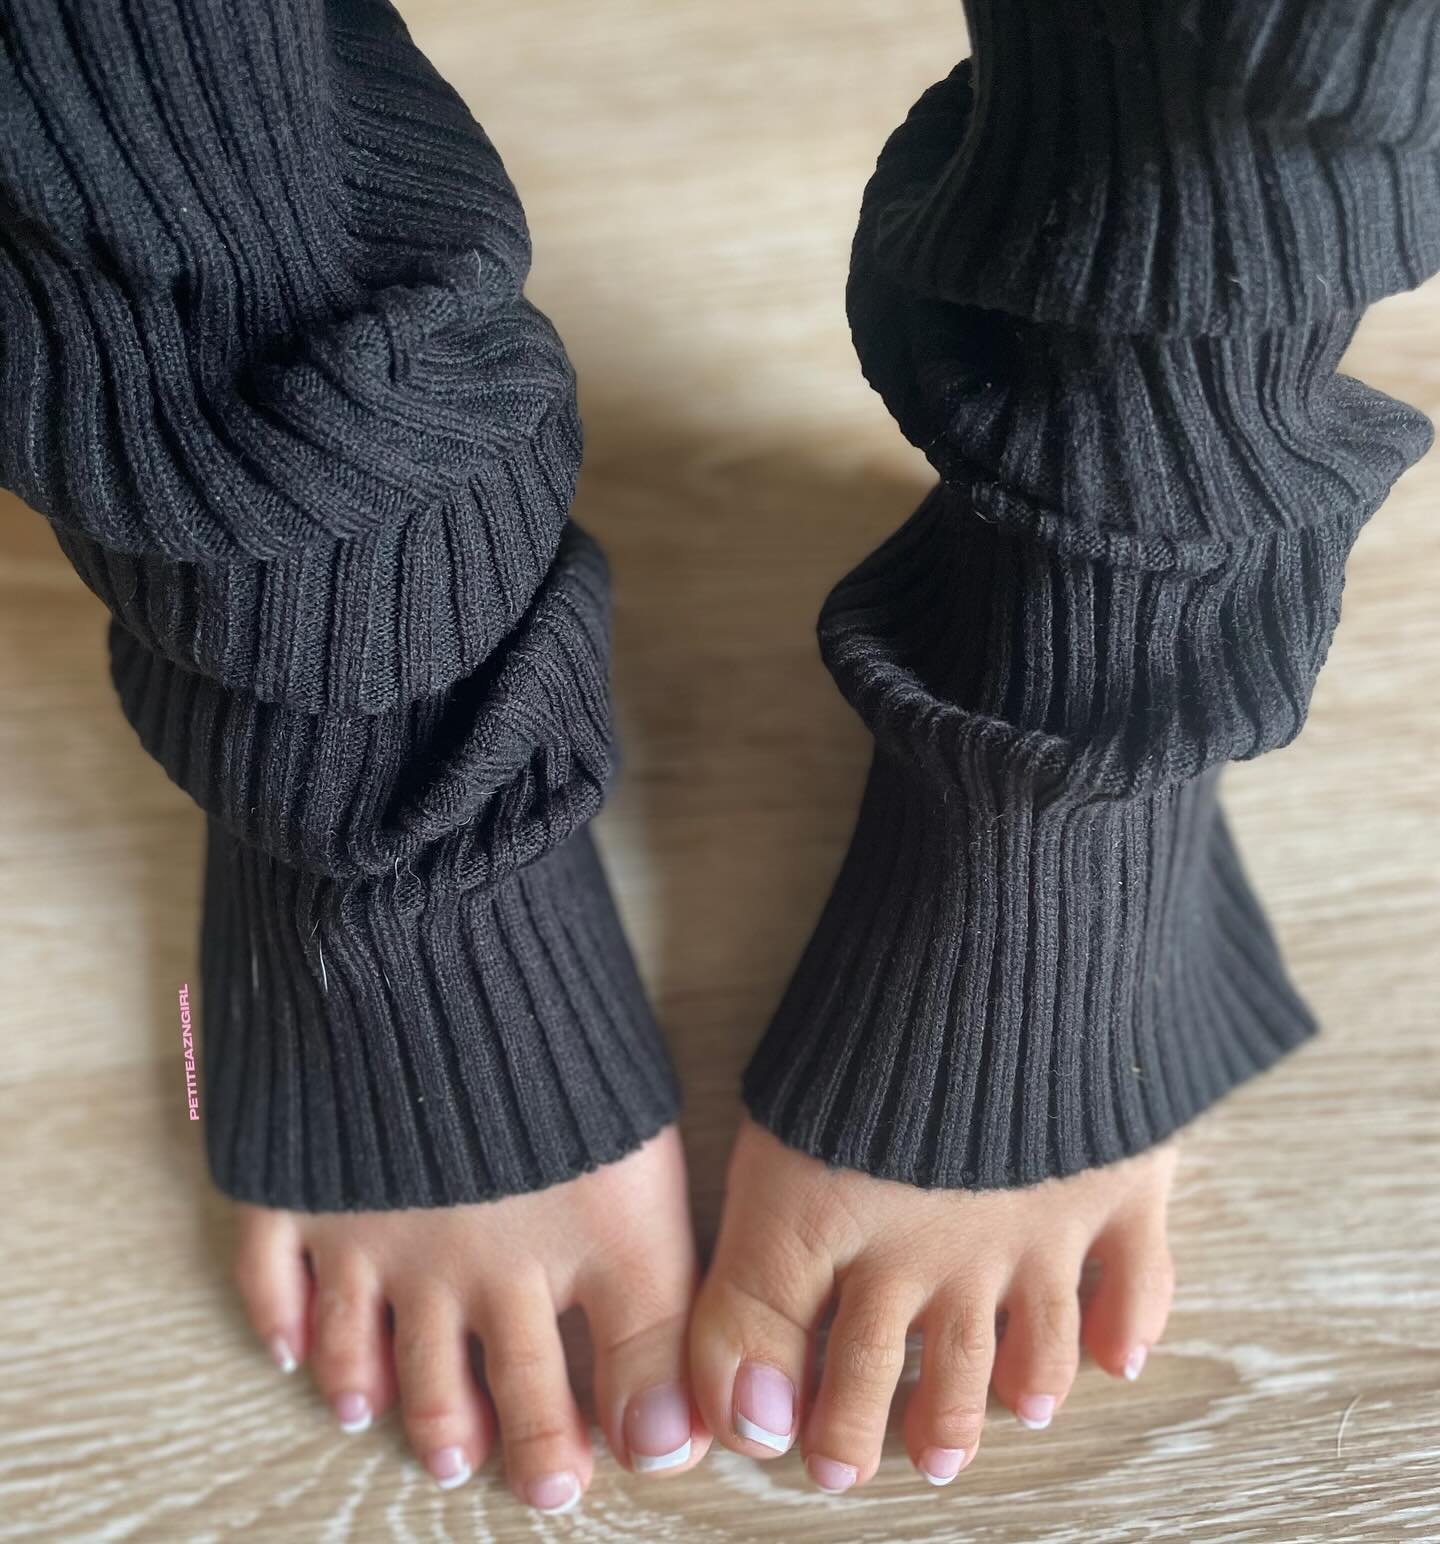 Hi everyone! ☺️ Took a little break from IG but your favorite tiny Asian is back. Did ya miss me? 😘

#beautifulfeetofig #beautifulfeets #asianfeet #asianfeetfetish #toelover #solelover #scrunchedsoles #solesandtoes #solesfeet #toeringfetish #feetgram #feetpic #anklets #higharches #longtoes #ticklish #ticklefeet #tickleasianfeet  #ticklishfeet #legwarmers #frenchtips